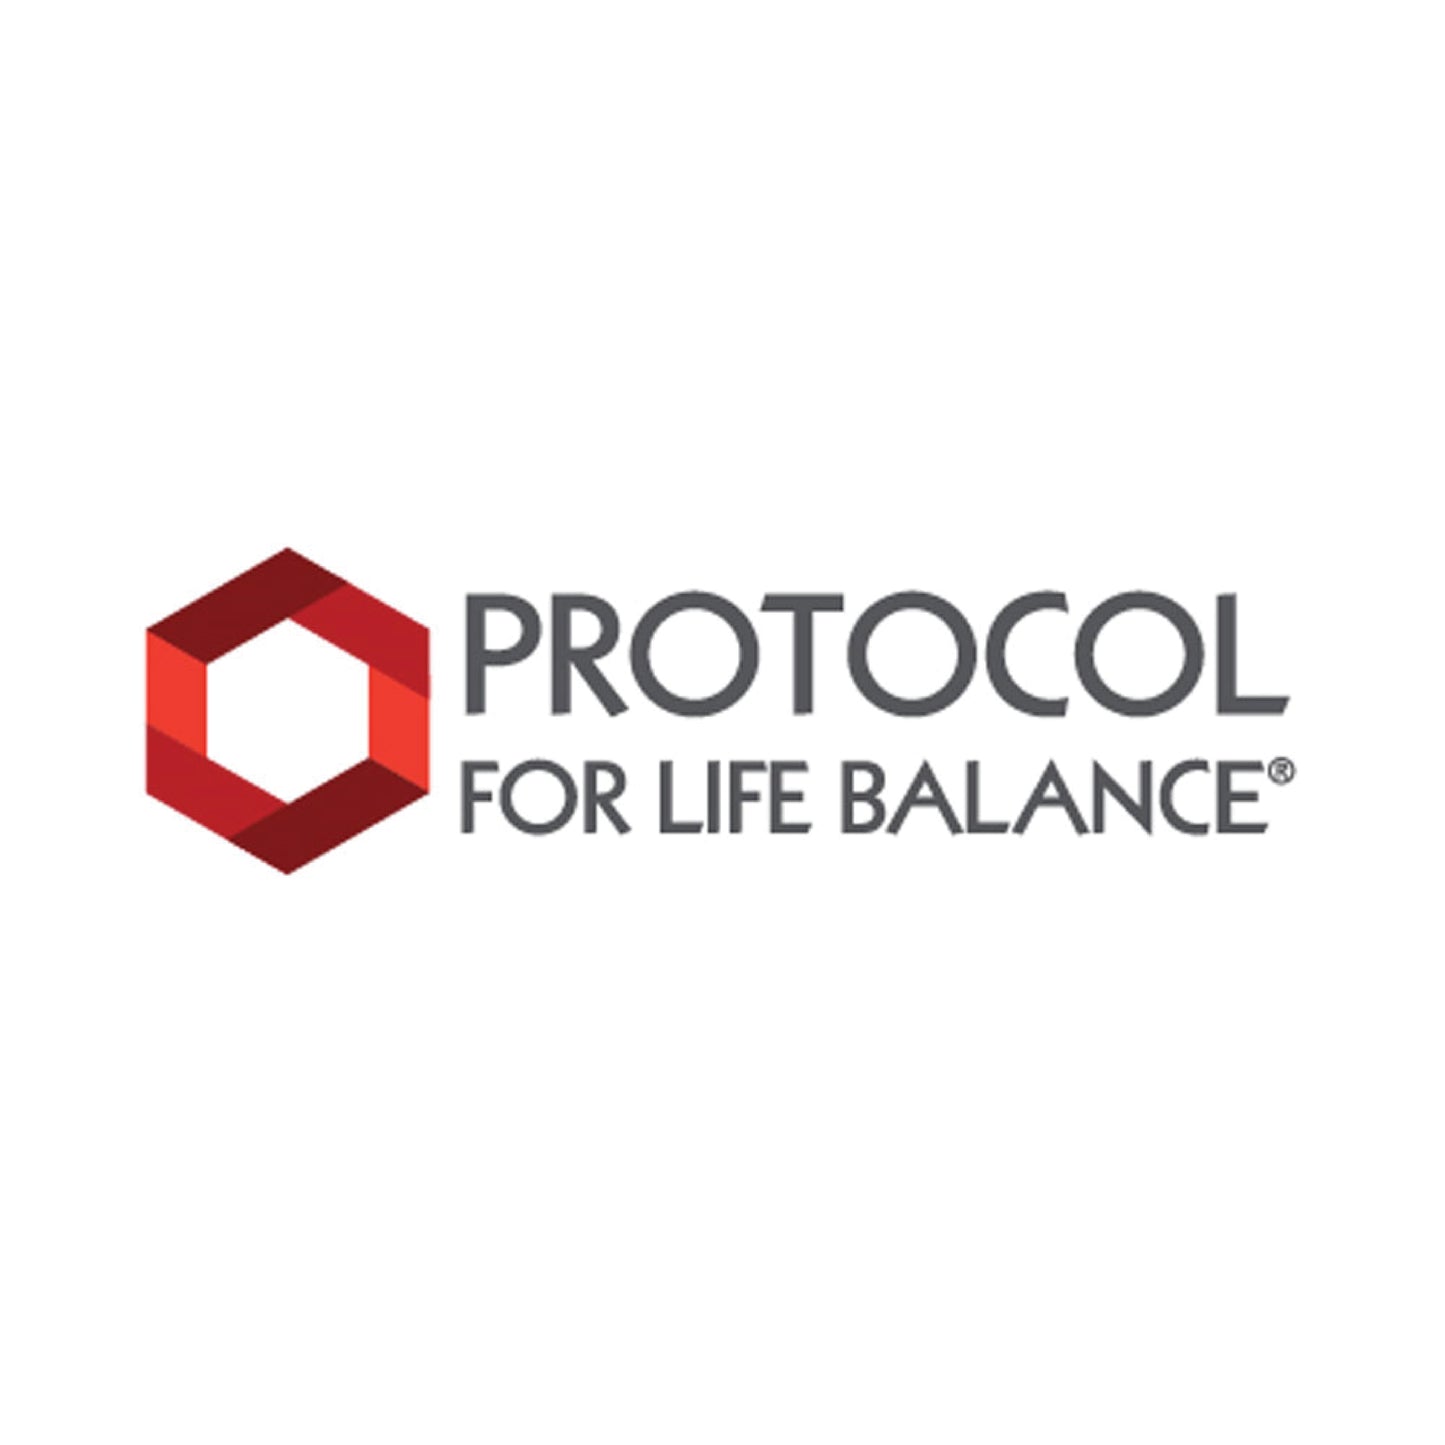 Protocol for Life Balance, Magnesium Citrate, 100 Tablets